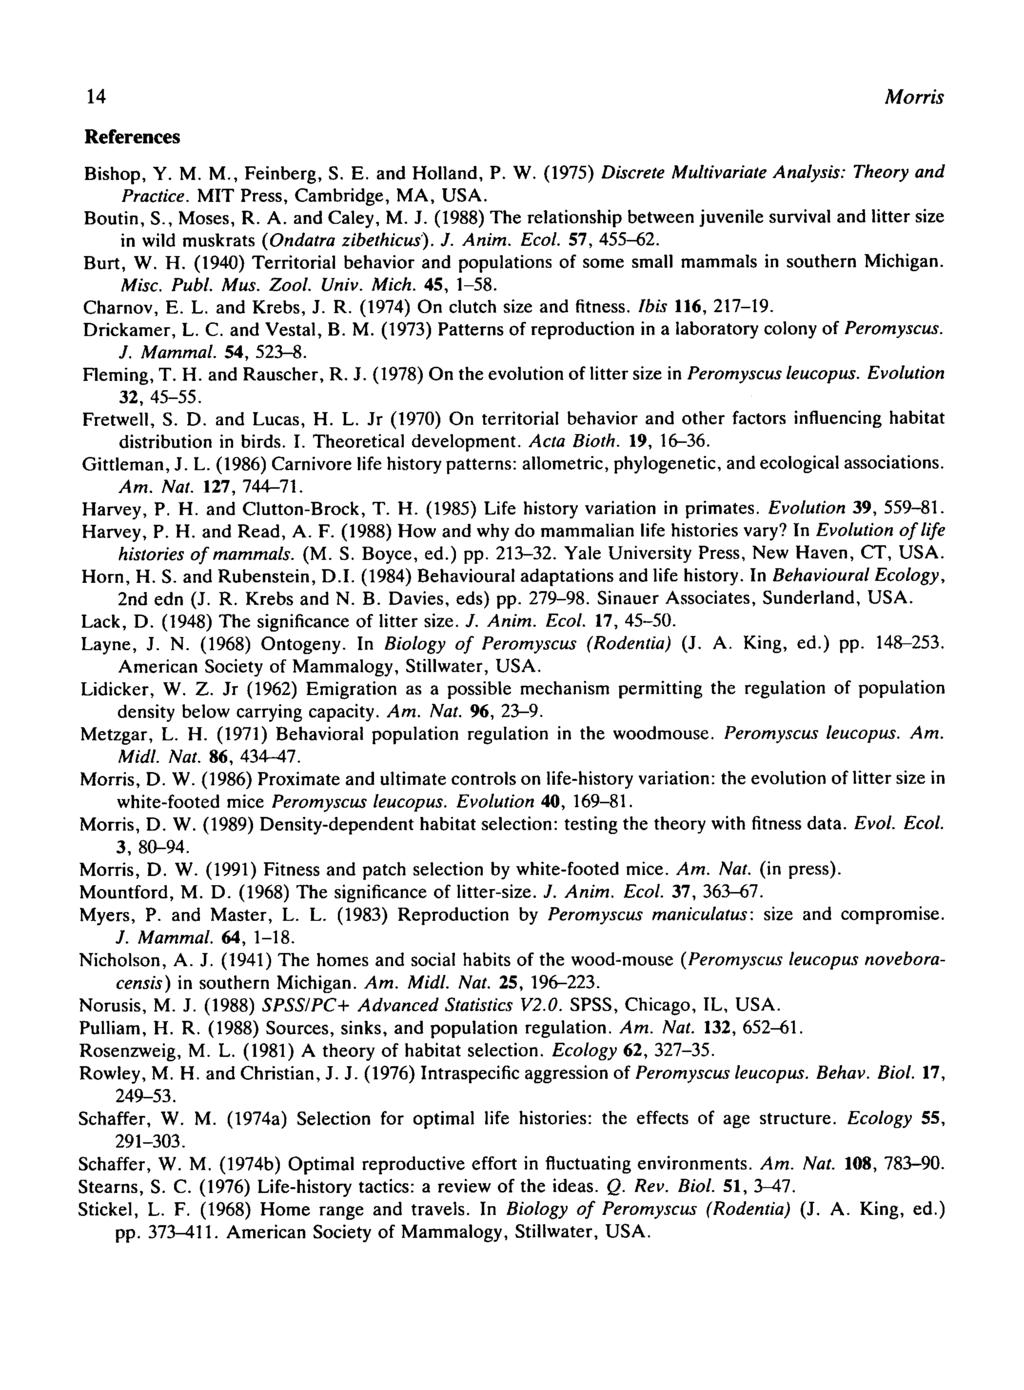 14 Morris References Bishop, Y. M. M., Feinberg, S. E. and Holland, P. W. (1975) Discrete Multivariate Analysis: Theory and Practice. MIT Press, Cambridge, MA, USA. Boutin, S., Moses, R. A. and Caley, M.